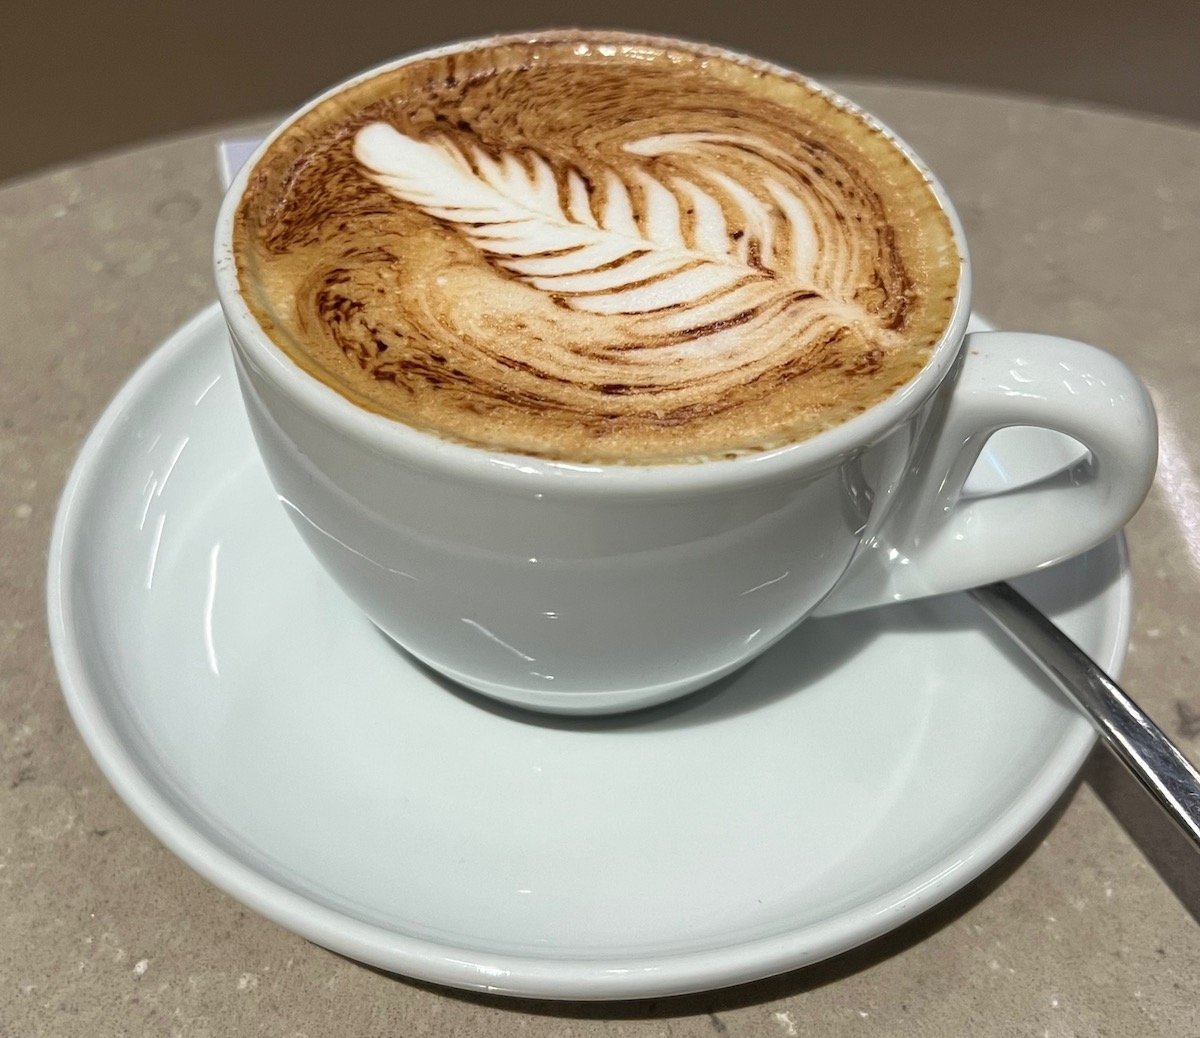 Which Airport Lounges Have The Best Coffee?